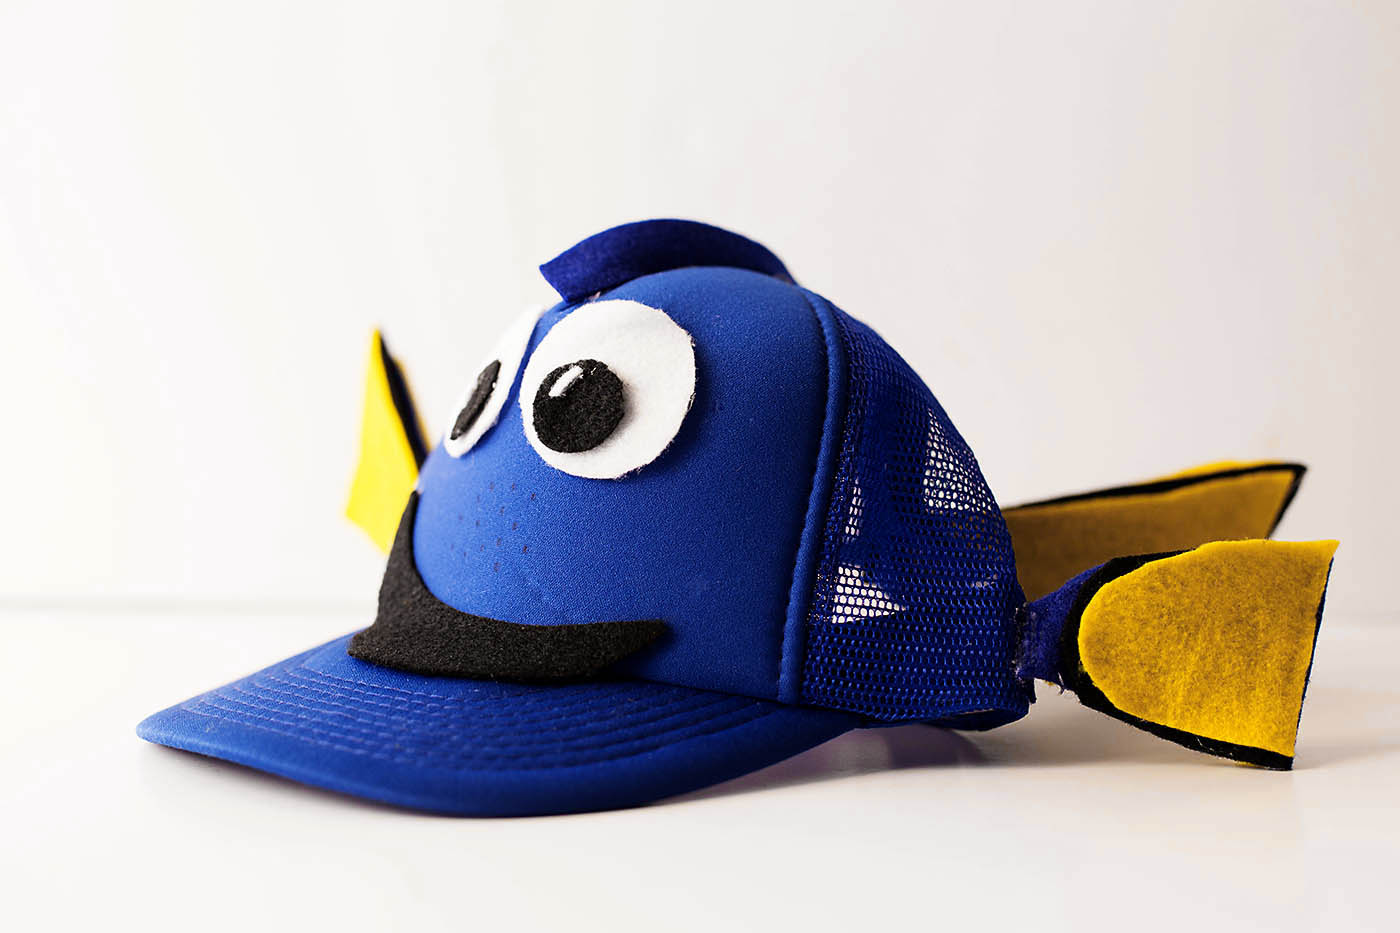 DIY Finding Dory hat perfect for an easy costume, trip to Disneyland or Walt Disney World, for cosplay or just because you love Dory!